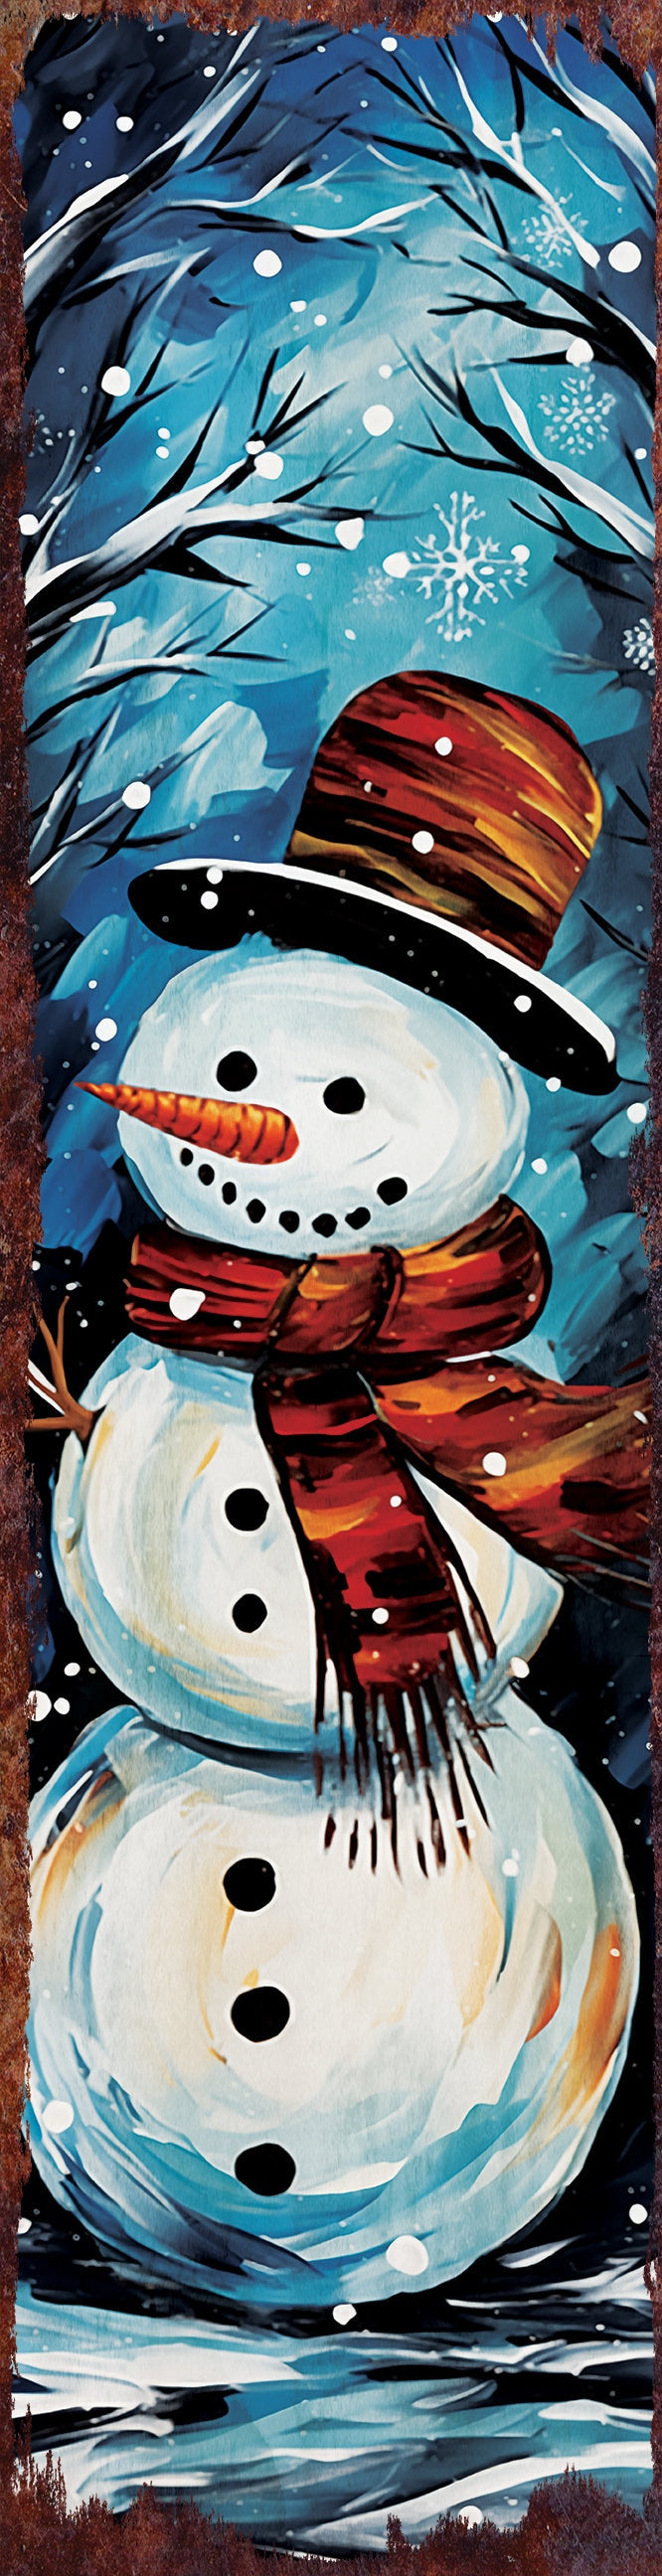 36in Snowman Merry Christmas Porch Sign - Oil Paint Style Art Sign, Modern Farmhouse Wall Decor, Vintage Christmas Decor for Outdoor